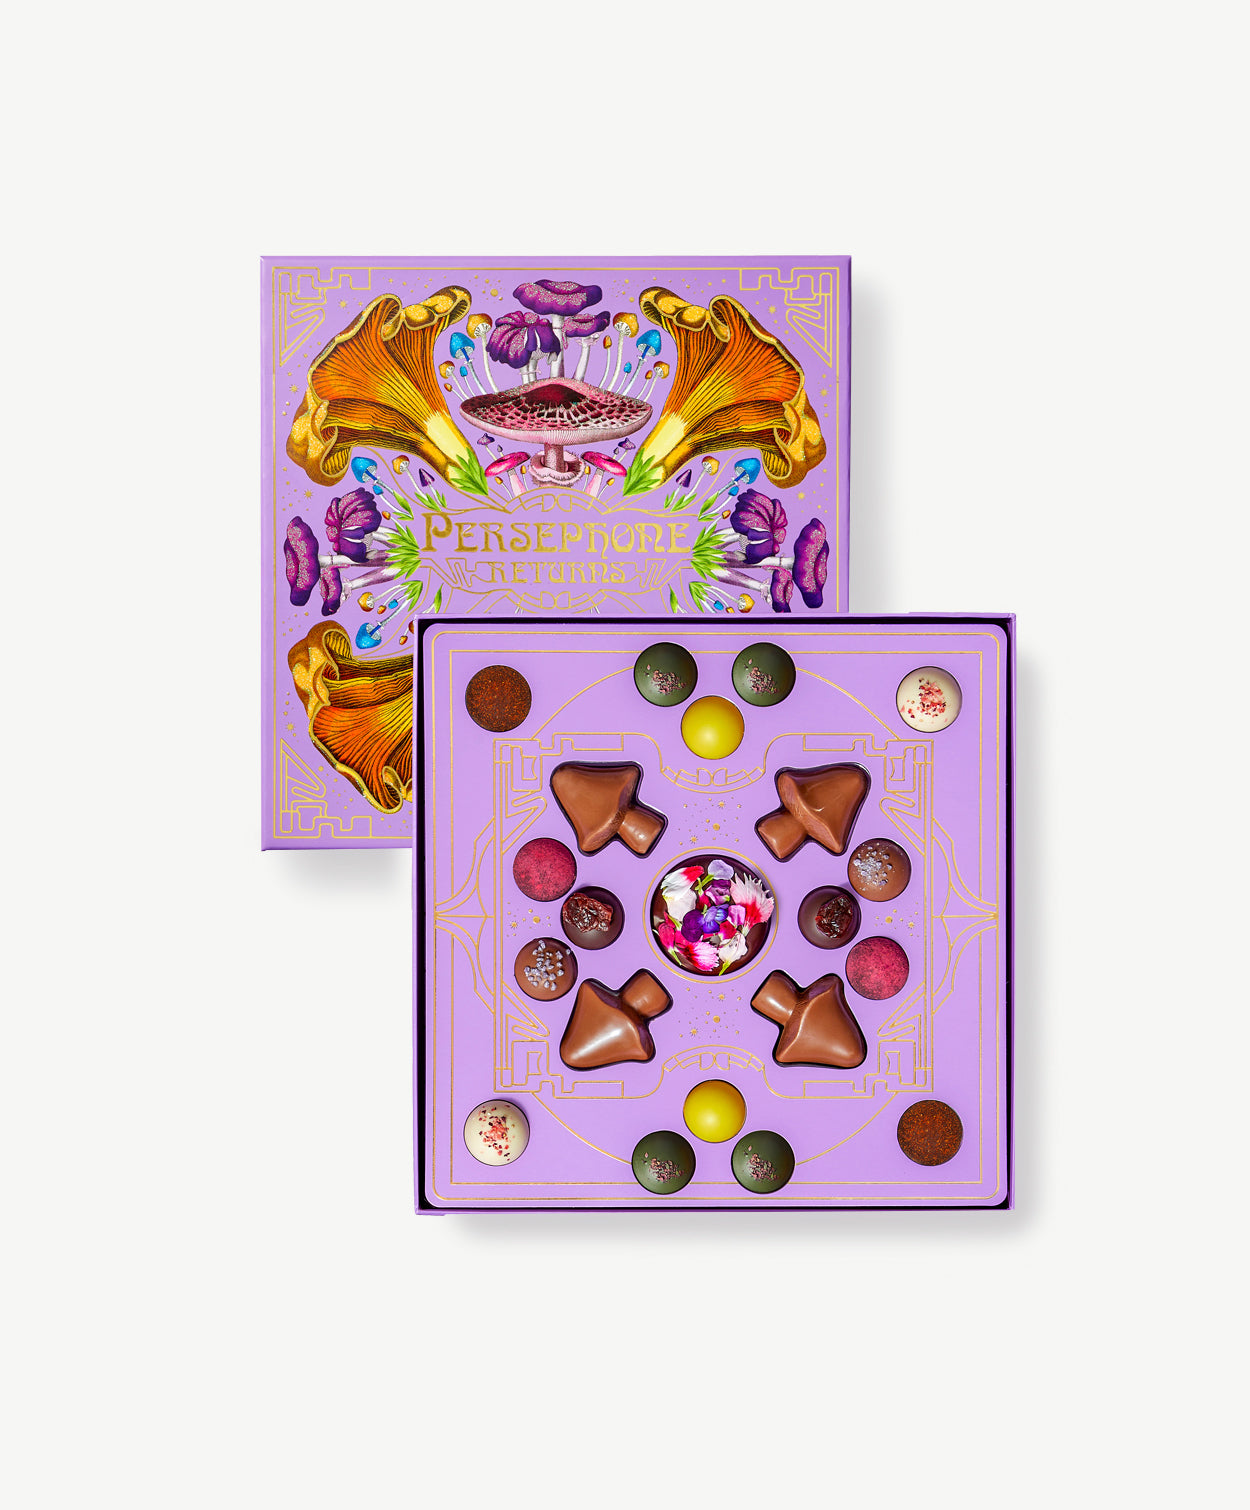 Pale Purple candy box decorated emblazoned in colorful, psychadelic mushroom art sits open displaying a multi-colored collection of chocolate mushroom truffles.  